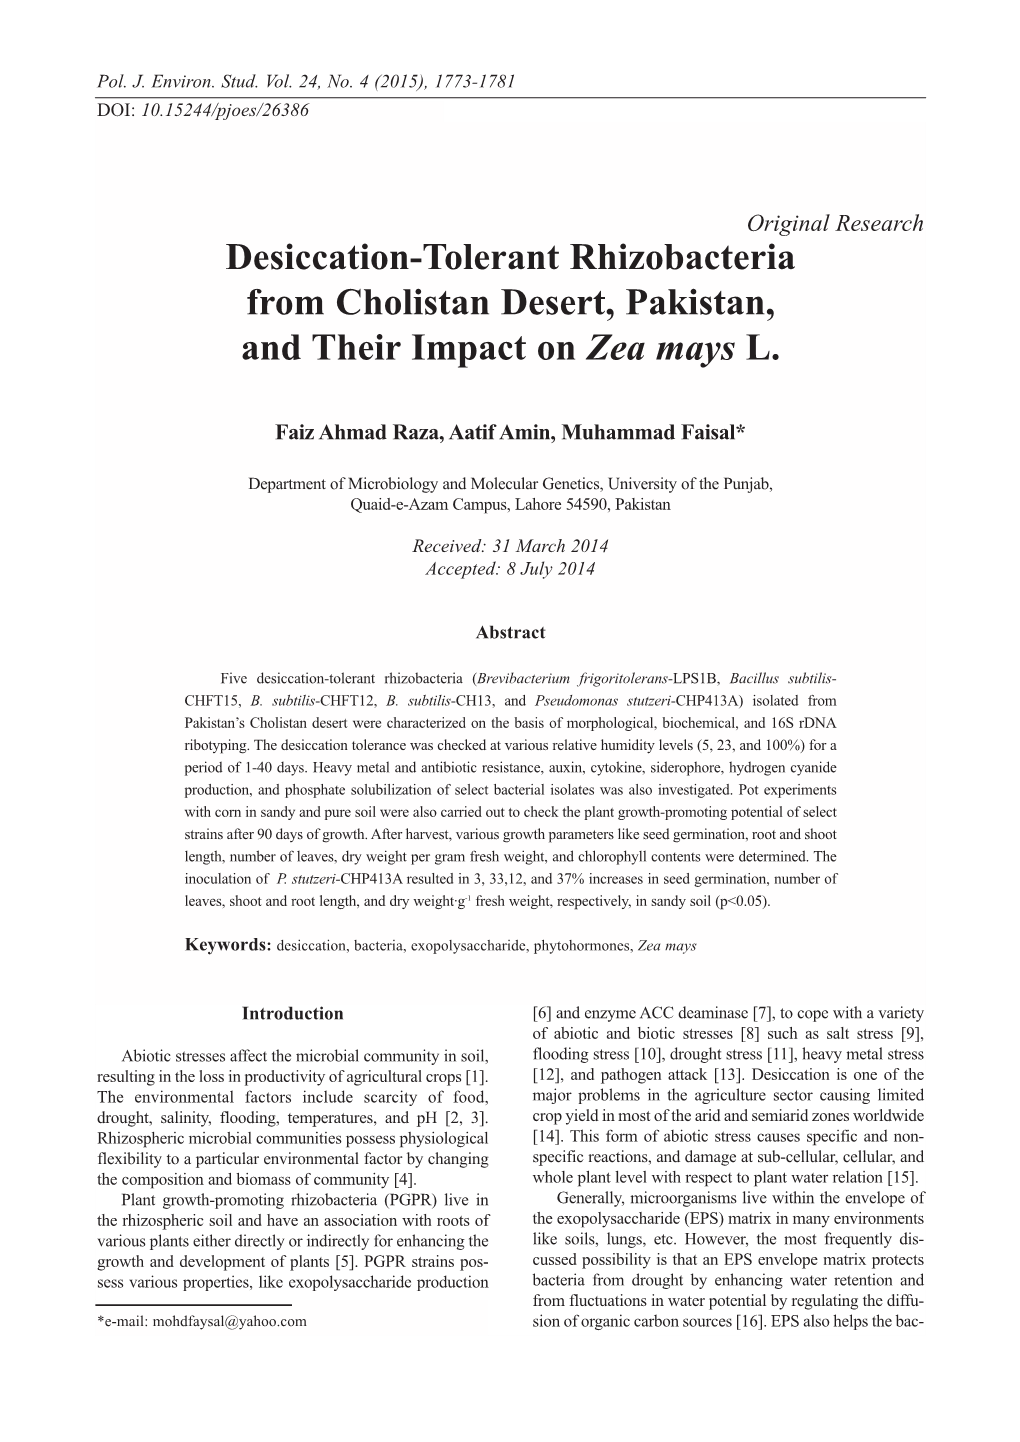 Desiccation-Tolerant Rhizobacteria from Cholistan Desert, Pakistan, and Their Impact on Zea Mays L